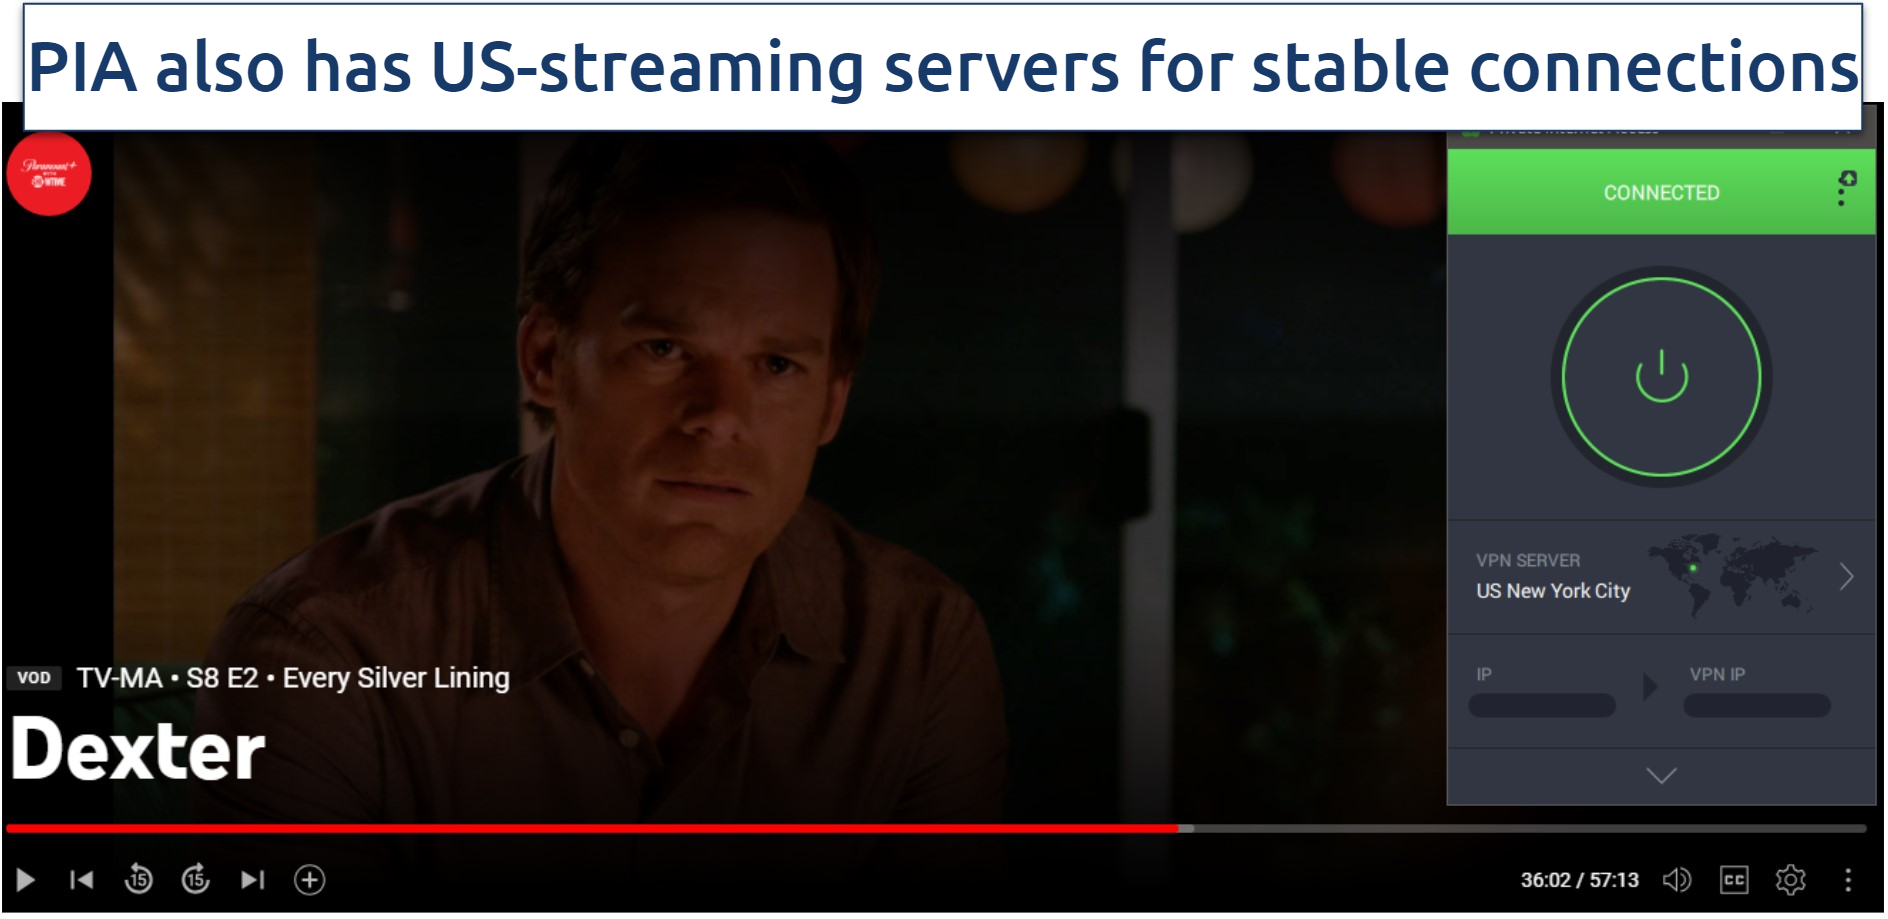 Screenshot of Dexter series on YouTube TV, with PIA connected to a US New York server